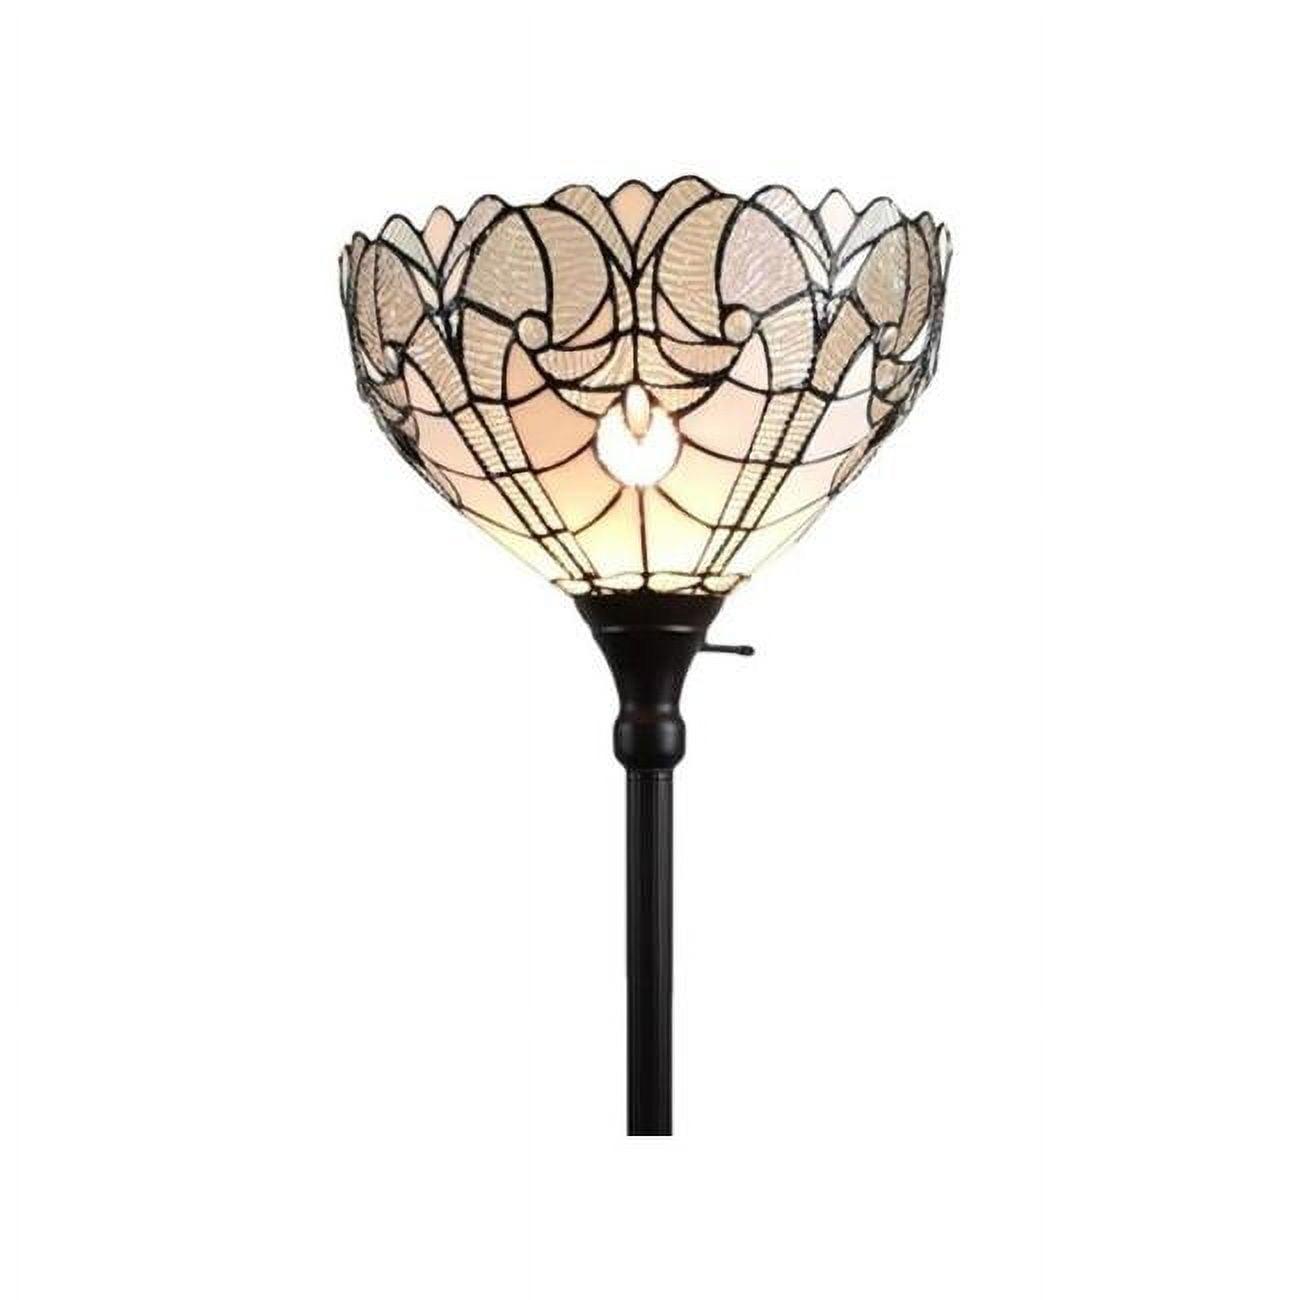 Elegant Tiffany-Style 72" White Stained Glass Torchiere Floor Lamp